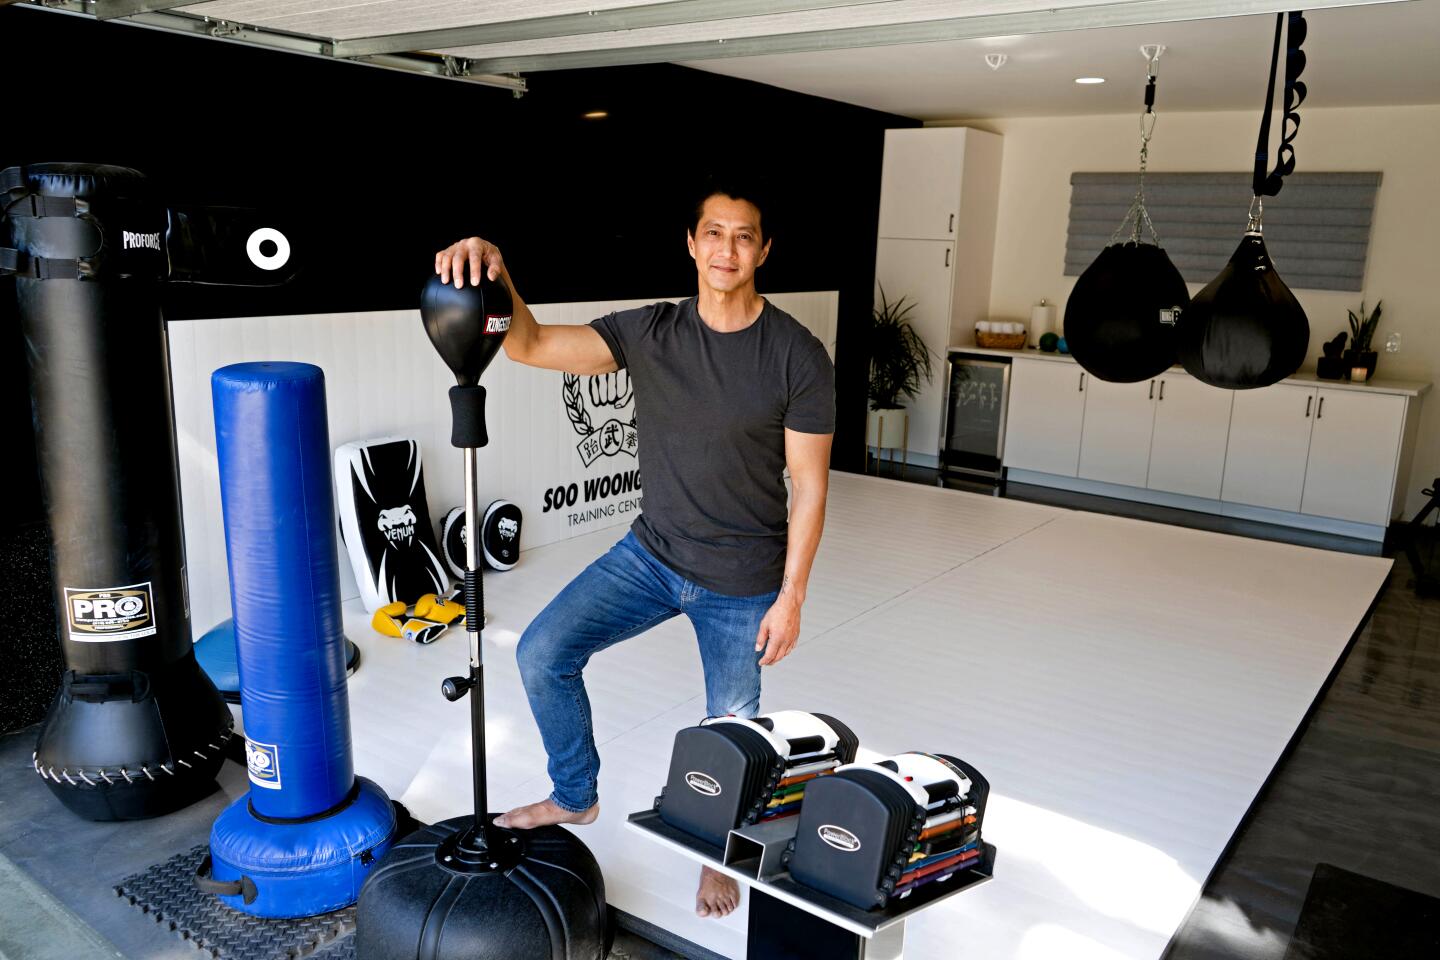 Actor and martial artist Will Yun Lee in the favorite room, the gym, of his home on Jan. 31, 2020. (Jesse Goddard / For The Times)